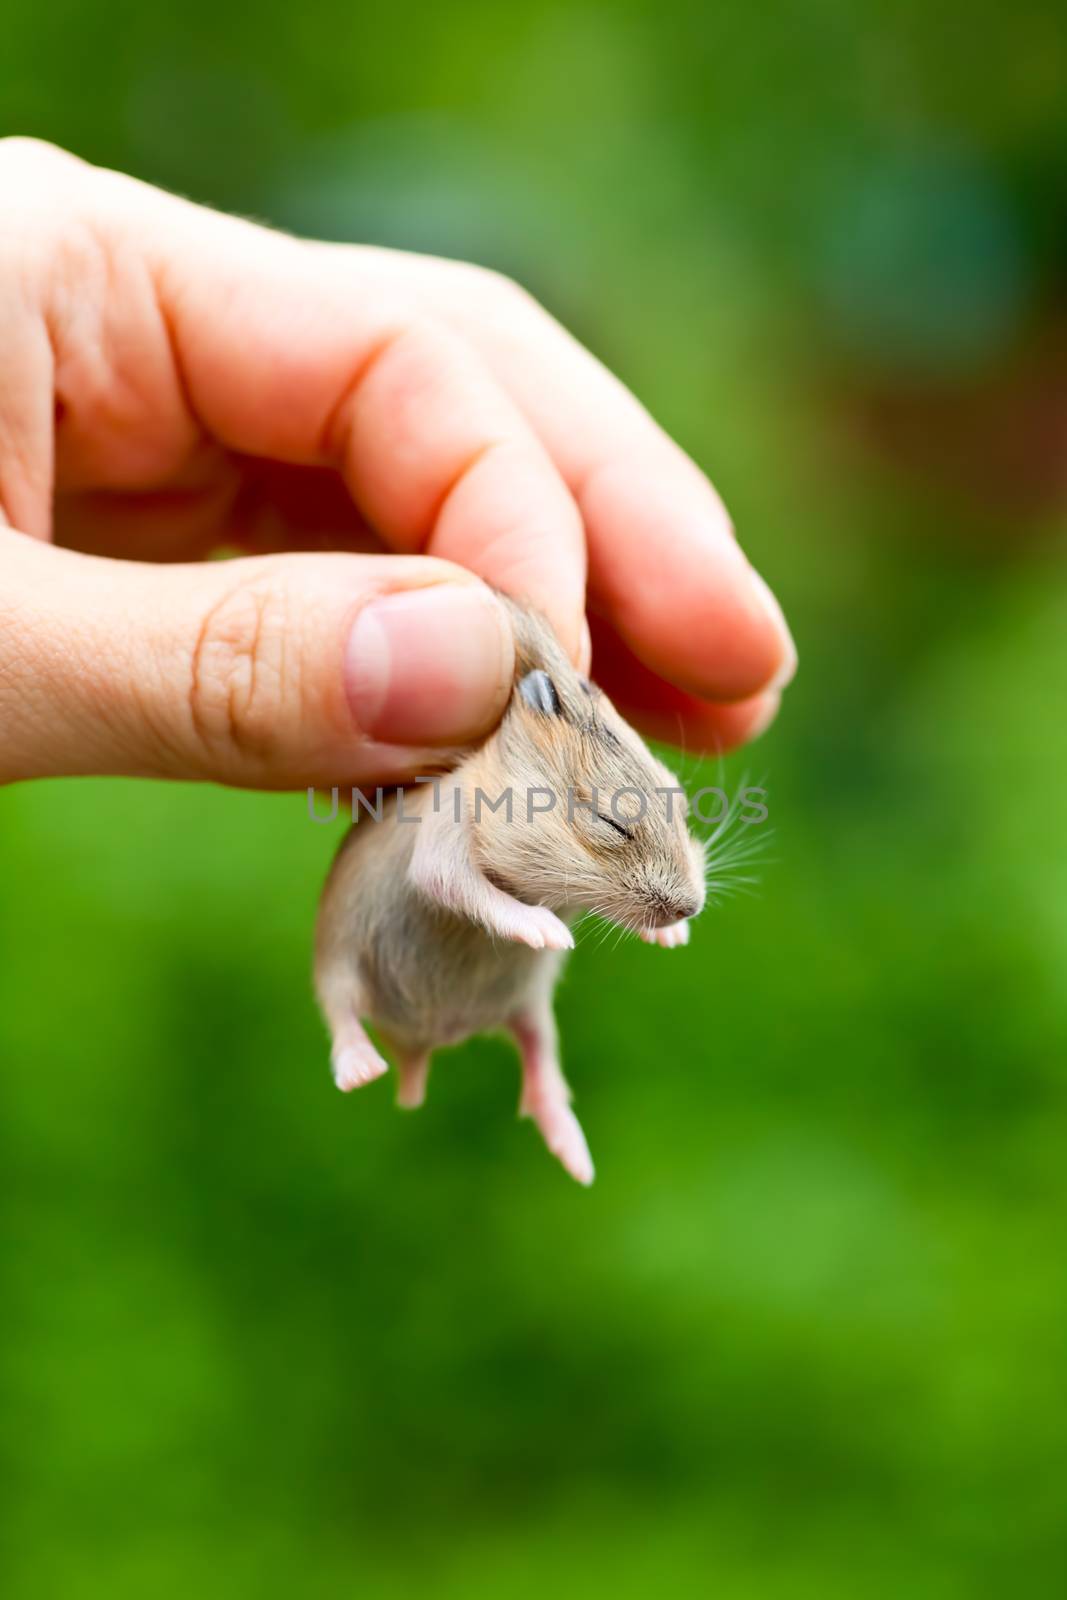 Hand with hamster pup by naumoid